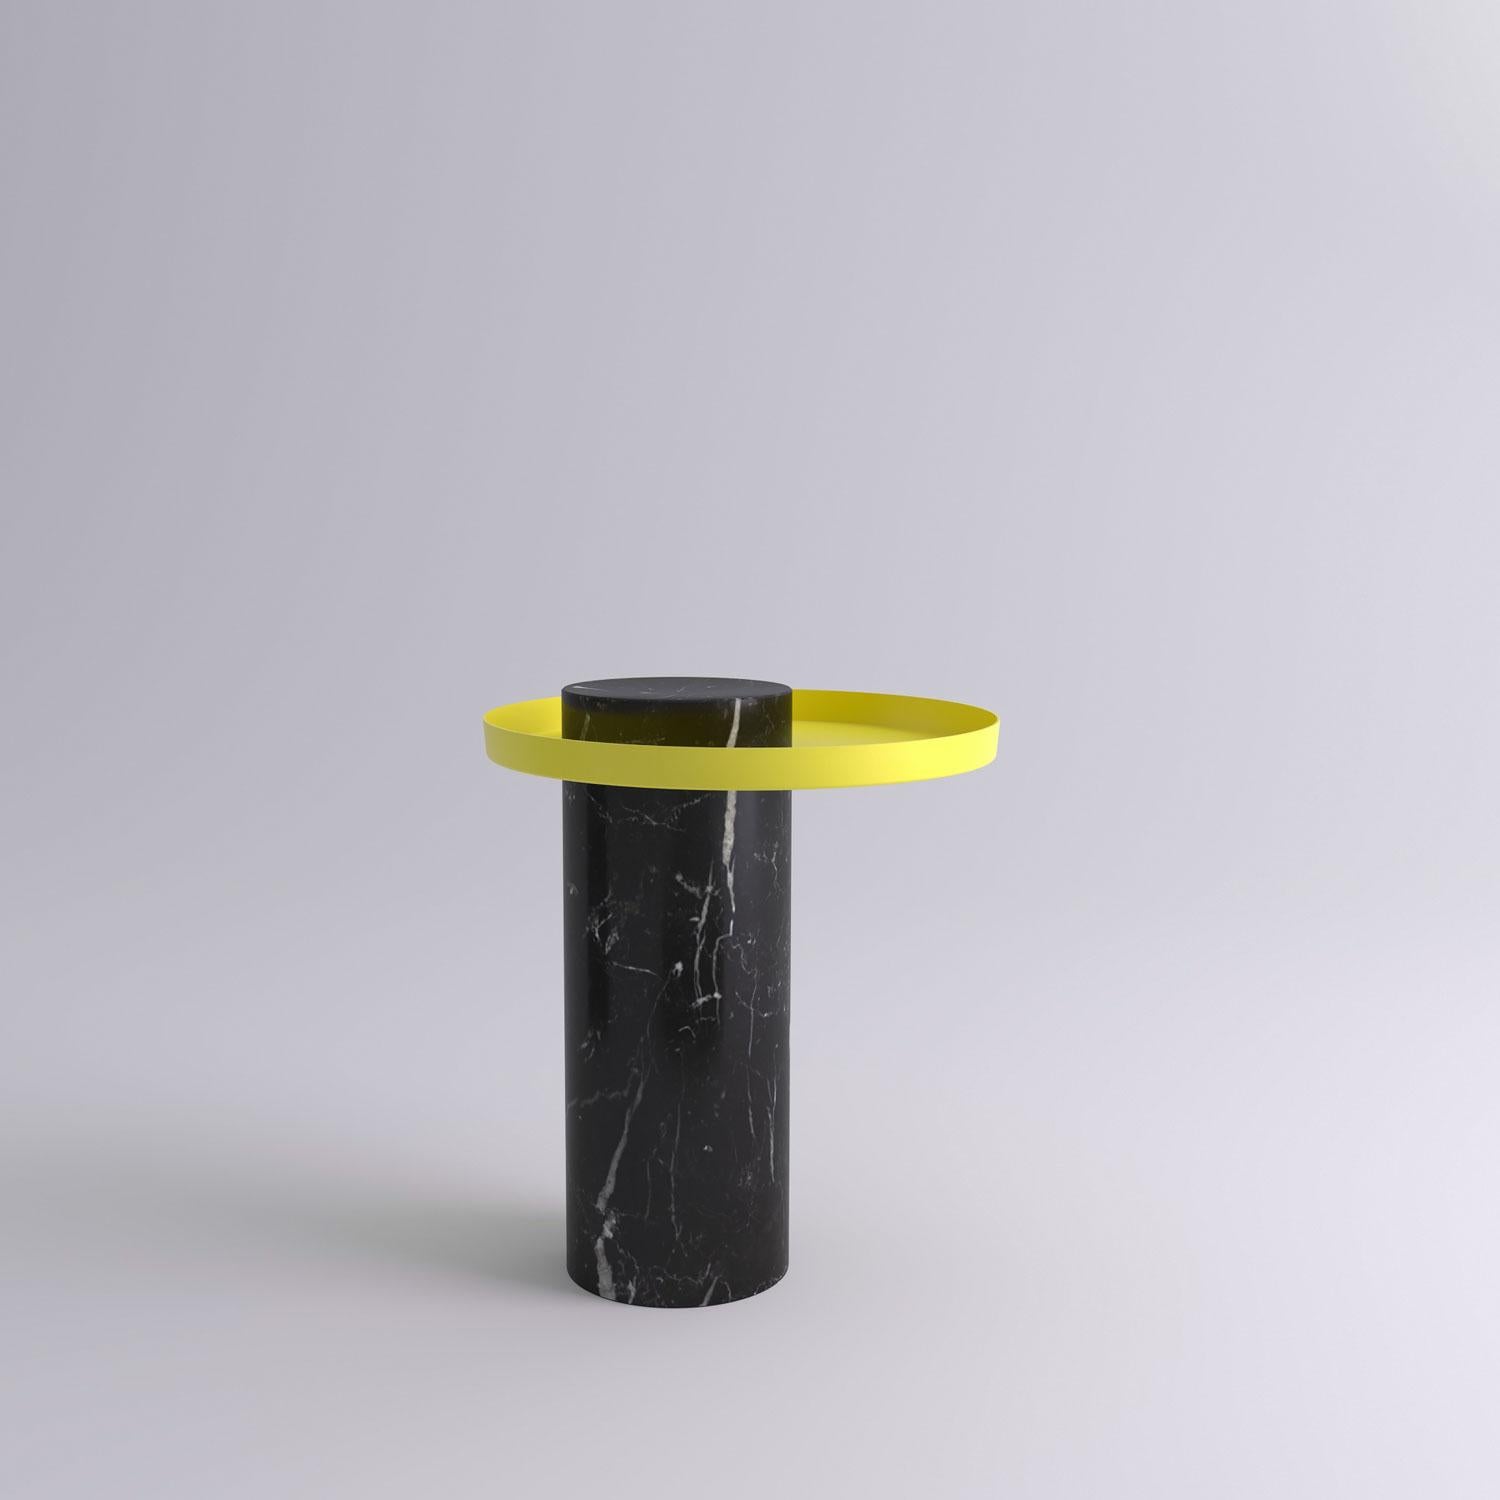 Medium black marquina contemporary guéridon, Sebastian Herkner.
Dimensions: D 40 x H 46 cm.
Materials: black Marquina marble, yellow metal tray.

The salute table exists in 3 sizes, 4 different marble stones for the column and 5 different